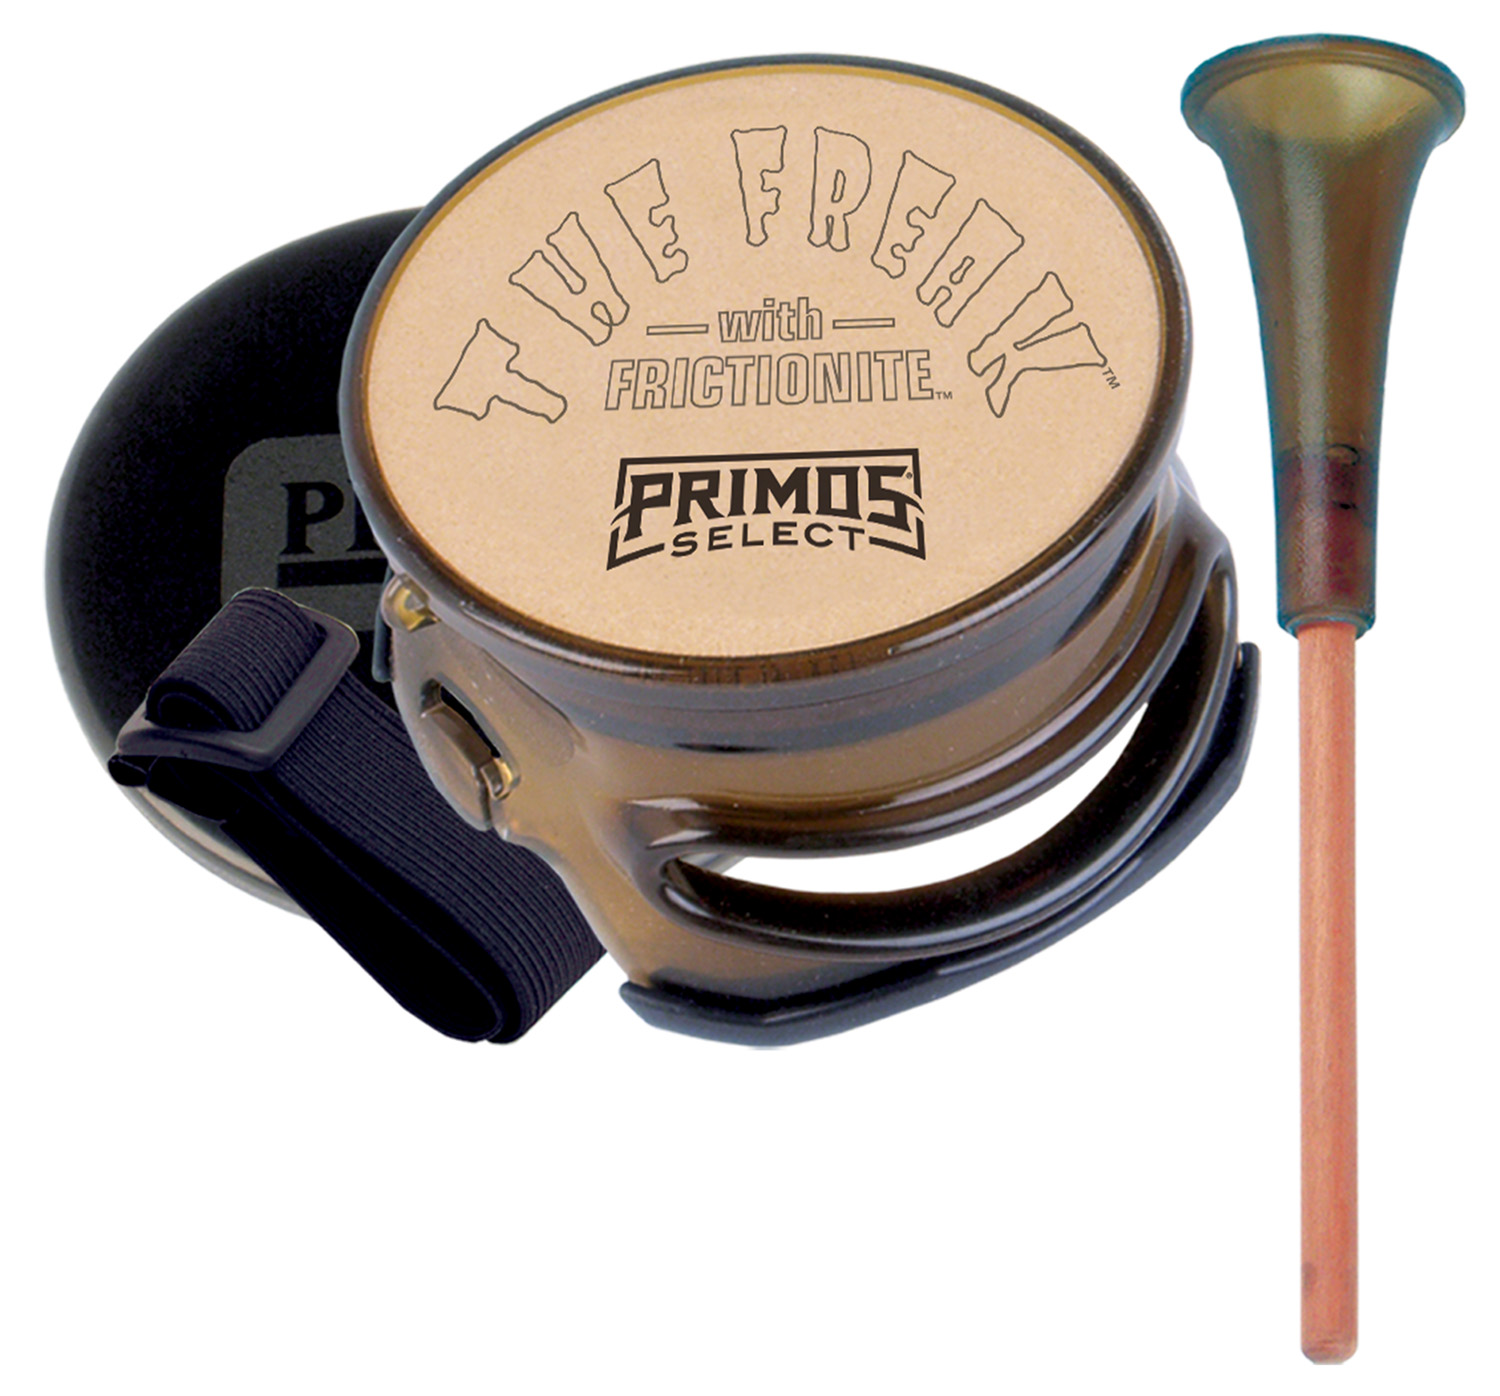 Primos 226 The Freak W/Frictionite Friction Call Turkey Sounds